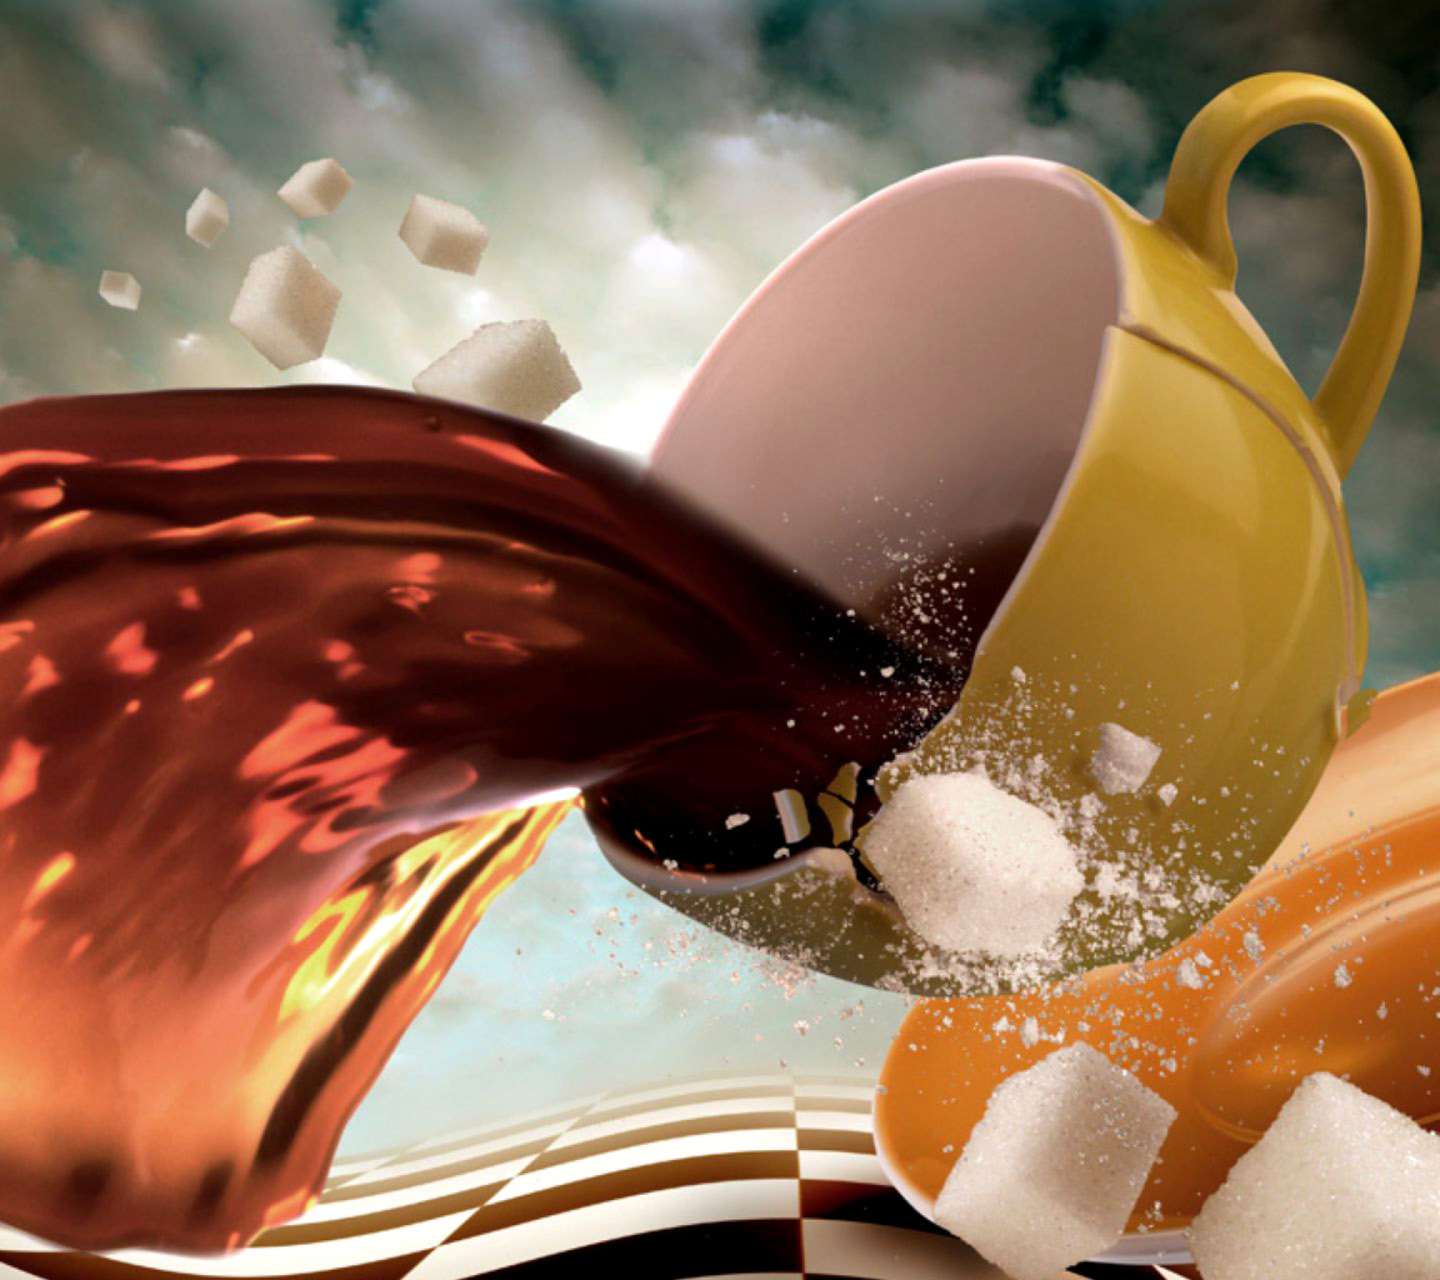 Surrealism Coffee Cup with Sugar cubes screenshot #1 1440x1280